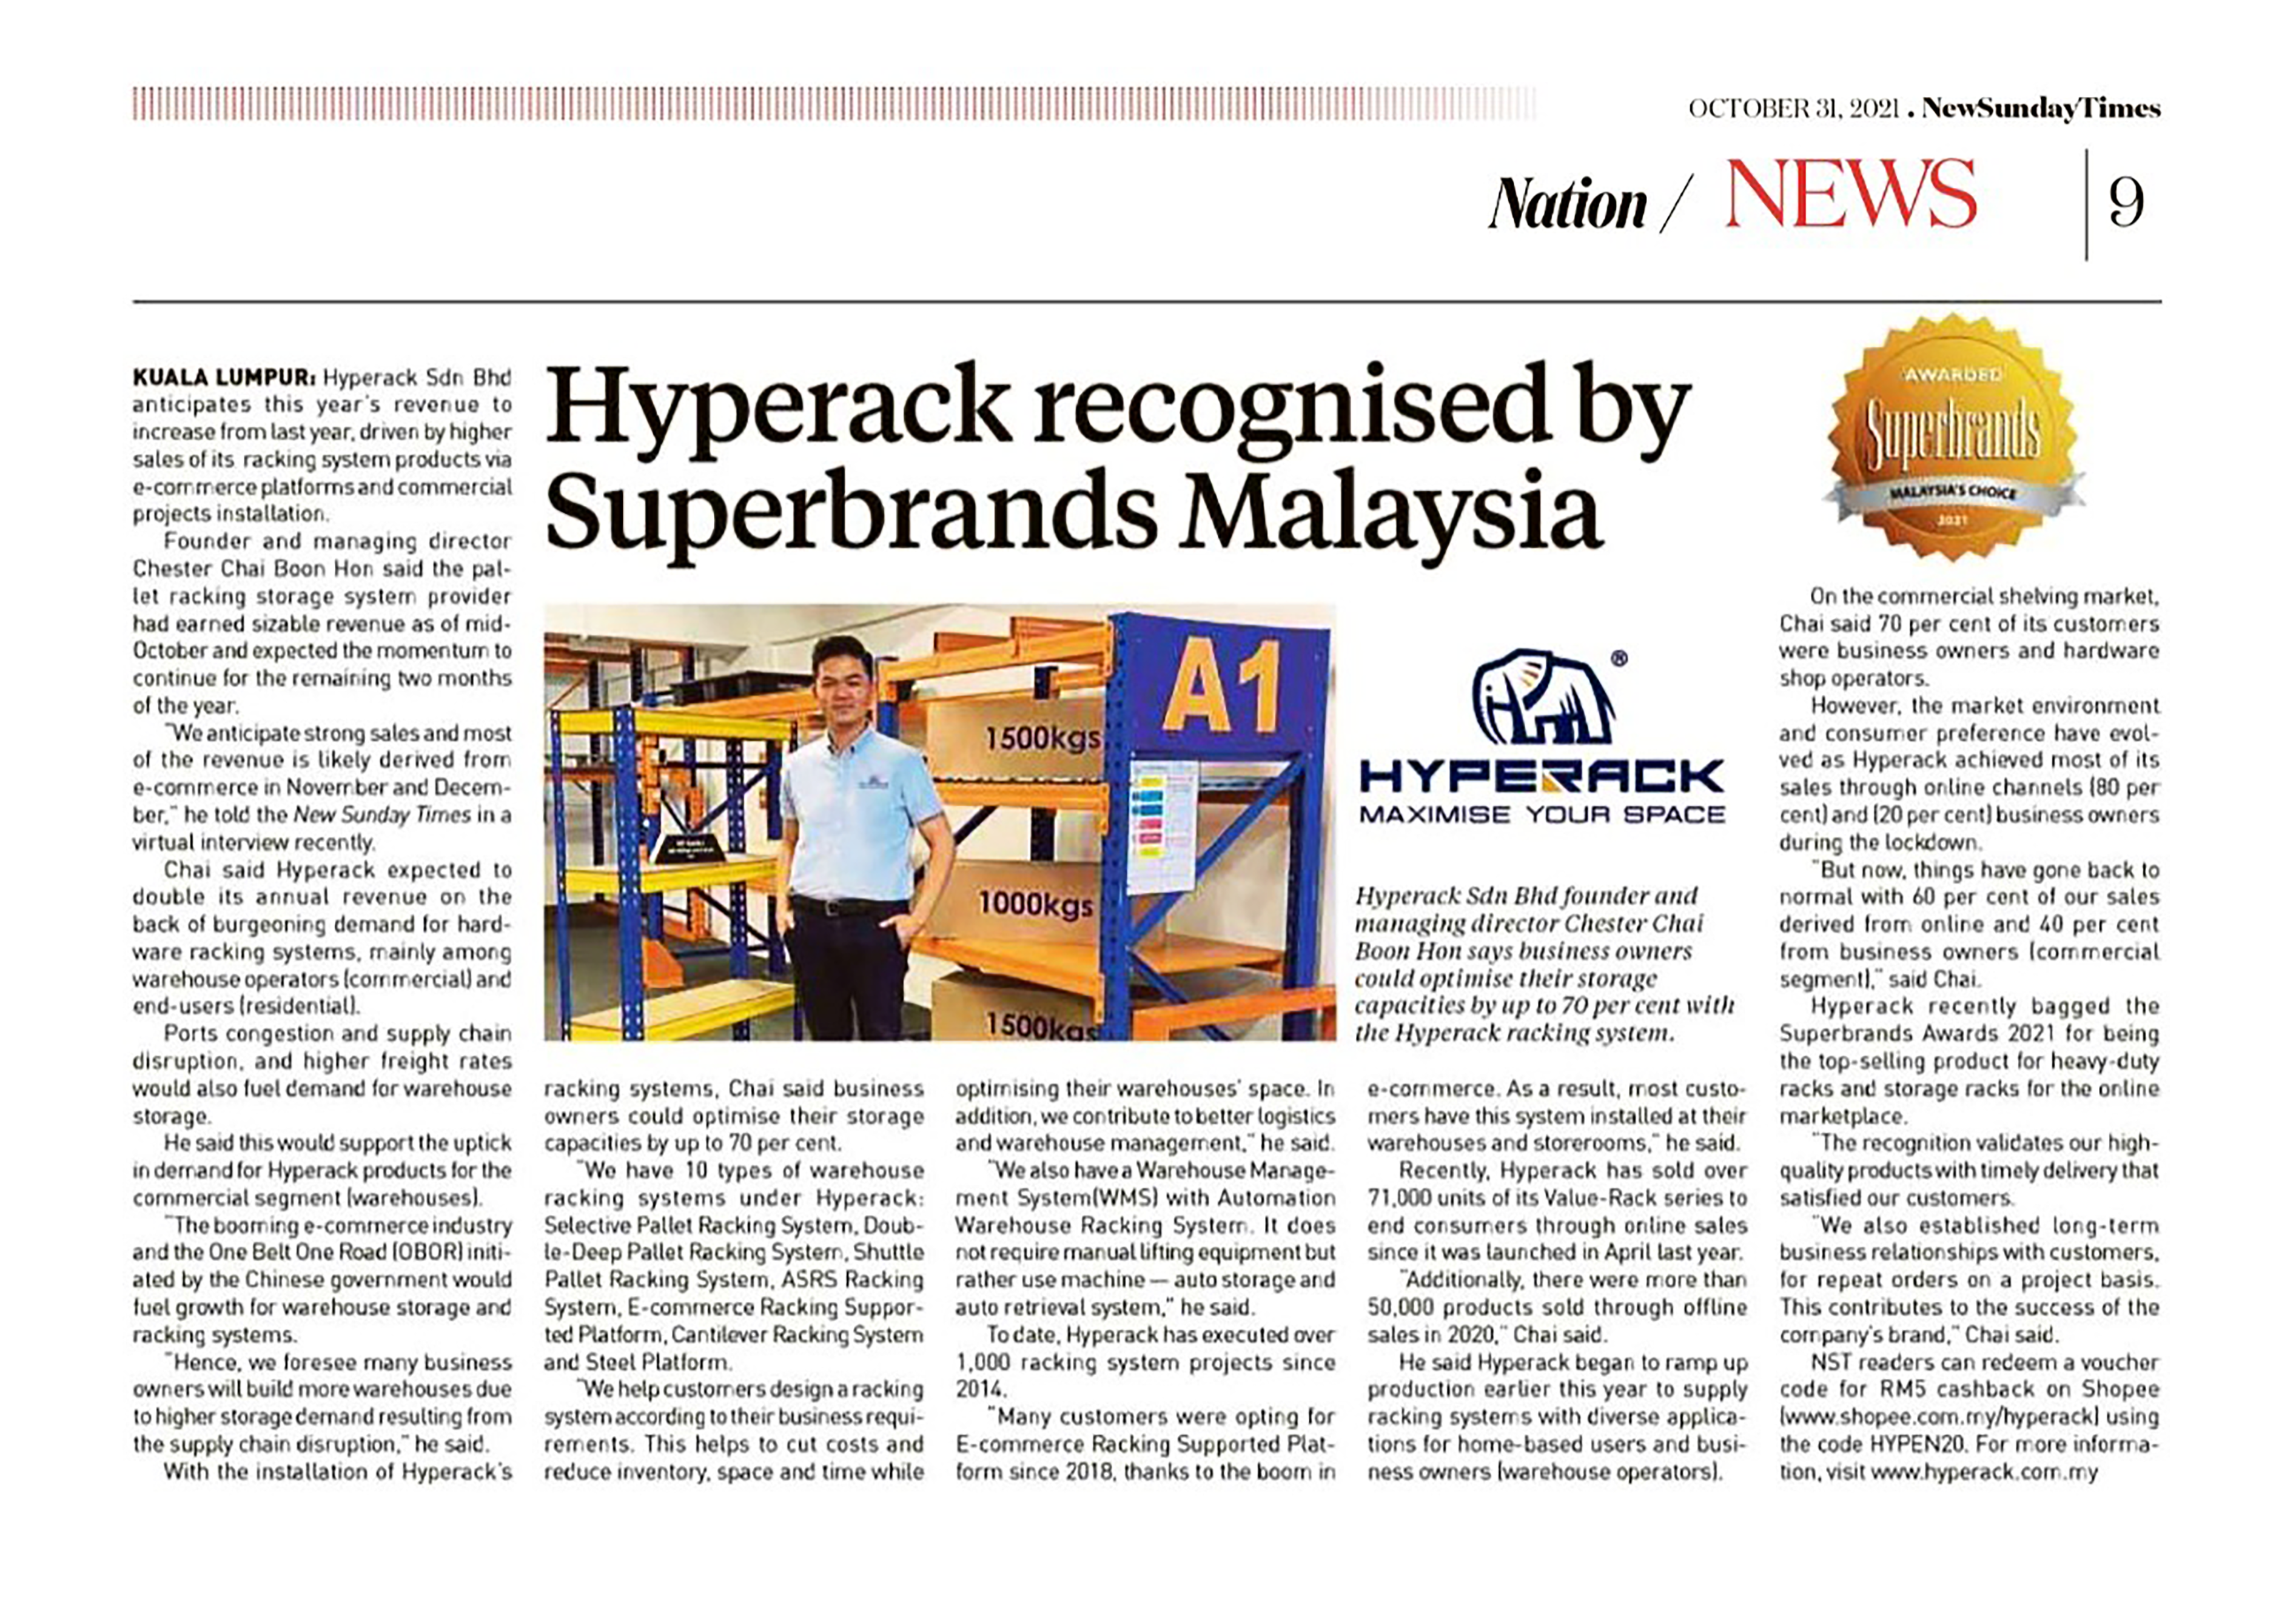 Hyperack recognised by superbrands malaysia